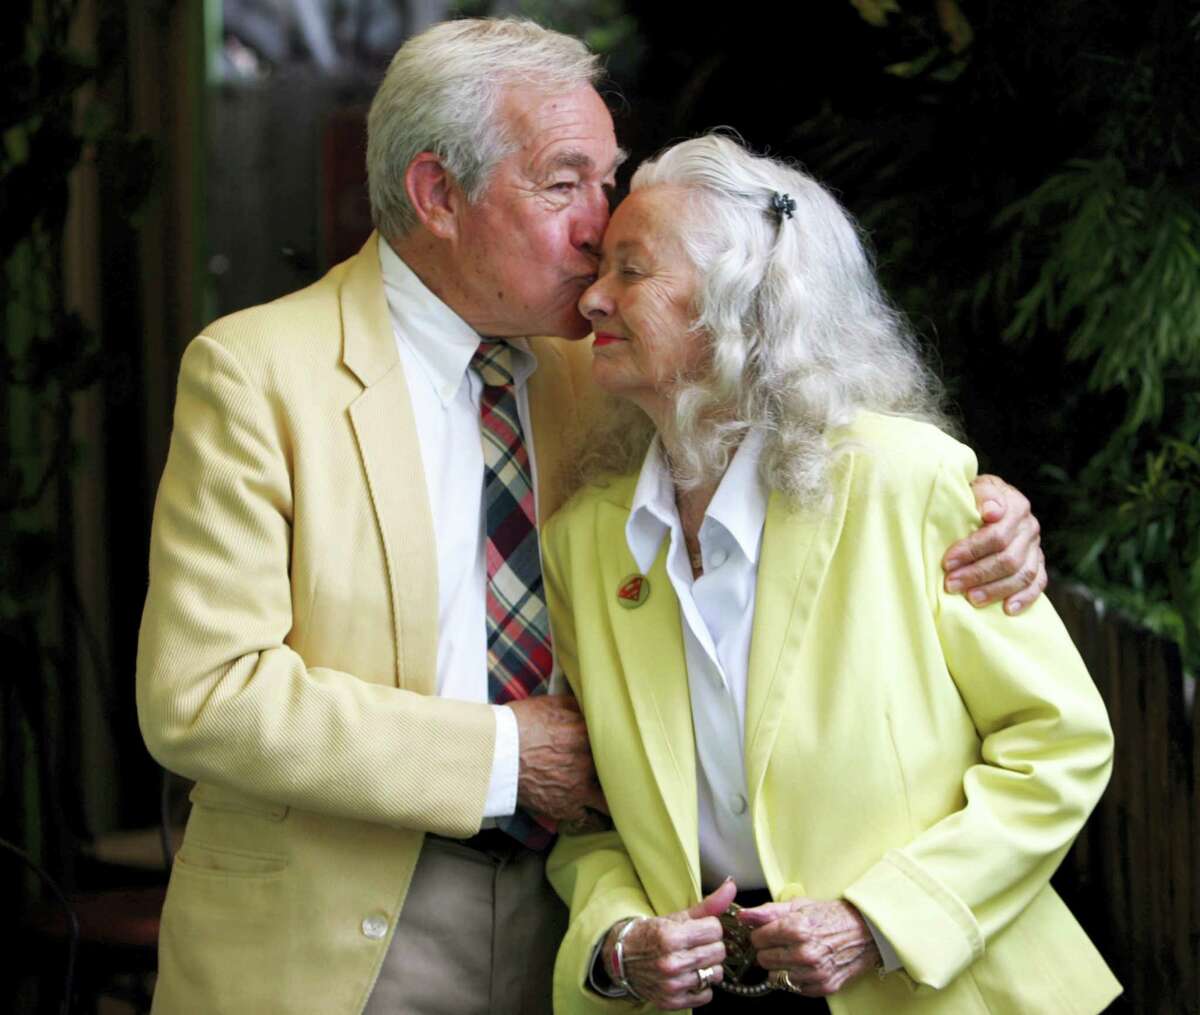 In this June 21, 2006, file photo, Actors Jack Larson, left, and Noel Neil, who originated the roles of Jimmy Olson and Lois Lane in the 1950s “Superman” television series, pose at Patrick’s Roadhouse in the Pacific Palisades area of Los Angeles. The actress who was the first to play Superman’s love interest, Lois Lane, on screen has died. Neill was 95. Neill’s biographer Larry Ward tells The Associated Press that she died Sunday, July 3, 2016, at her home in Tucson, Ariz., following a long illness.